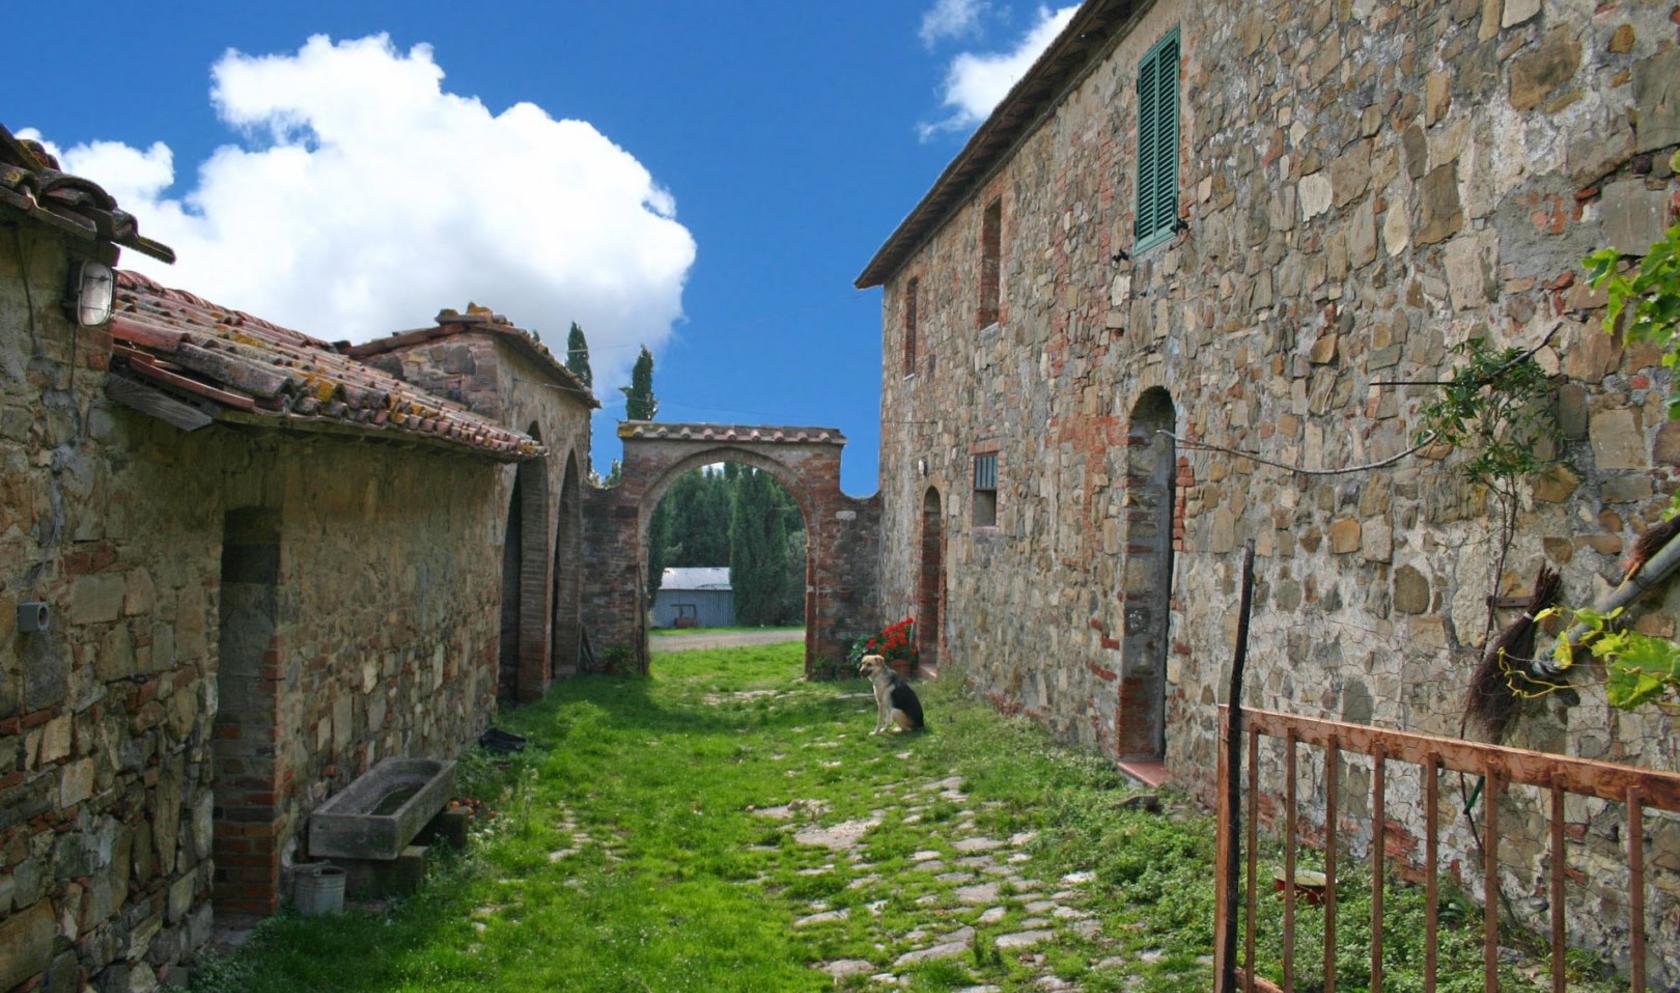 Toscana Immobiliare - The building dating back to the year 1800 has maintained over time the structure of the typical Tuscan farmhouse and a full-cycle farm